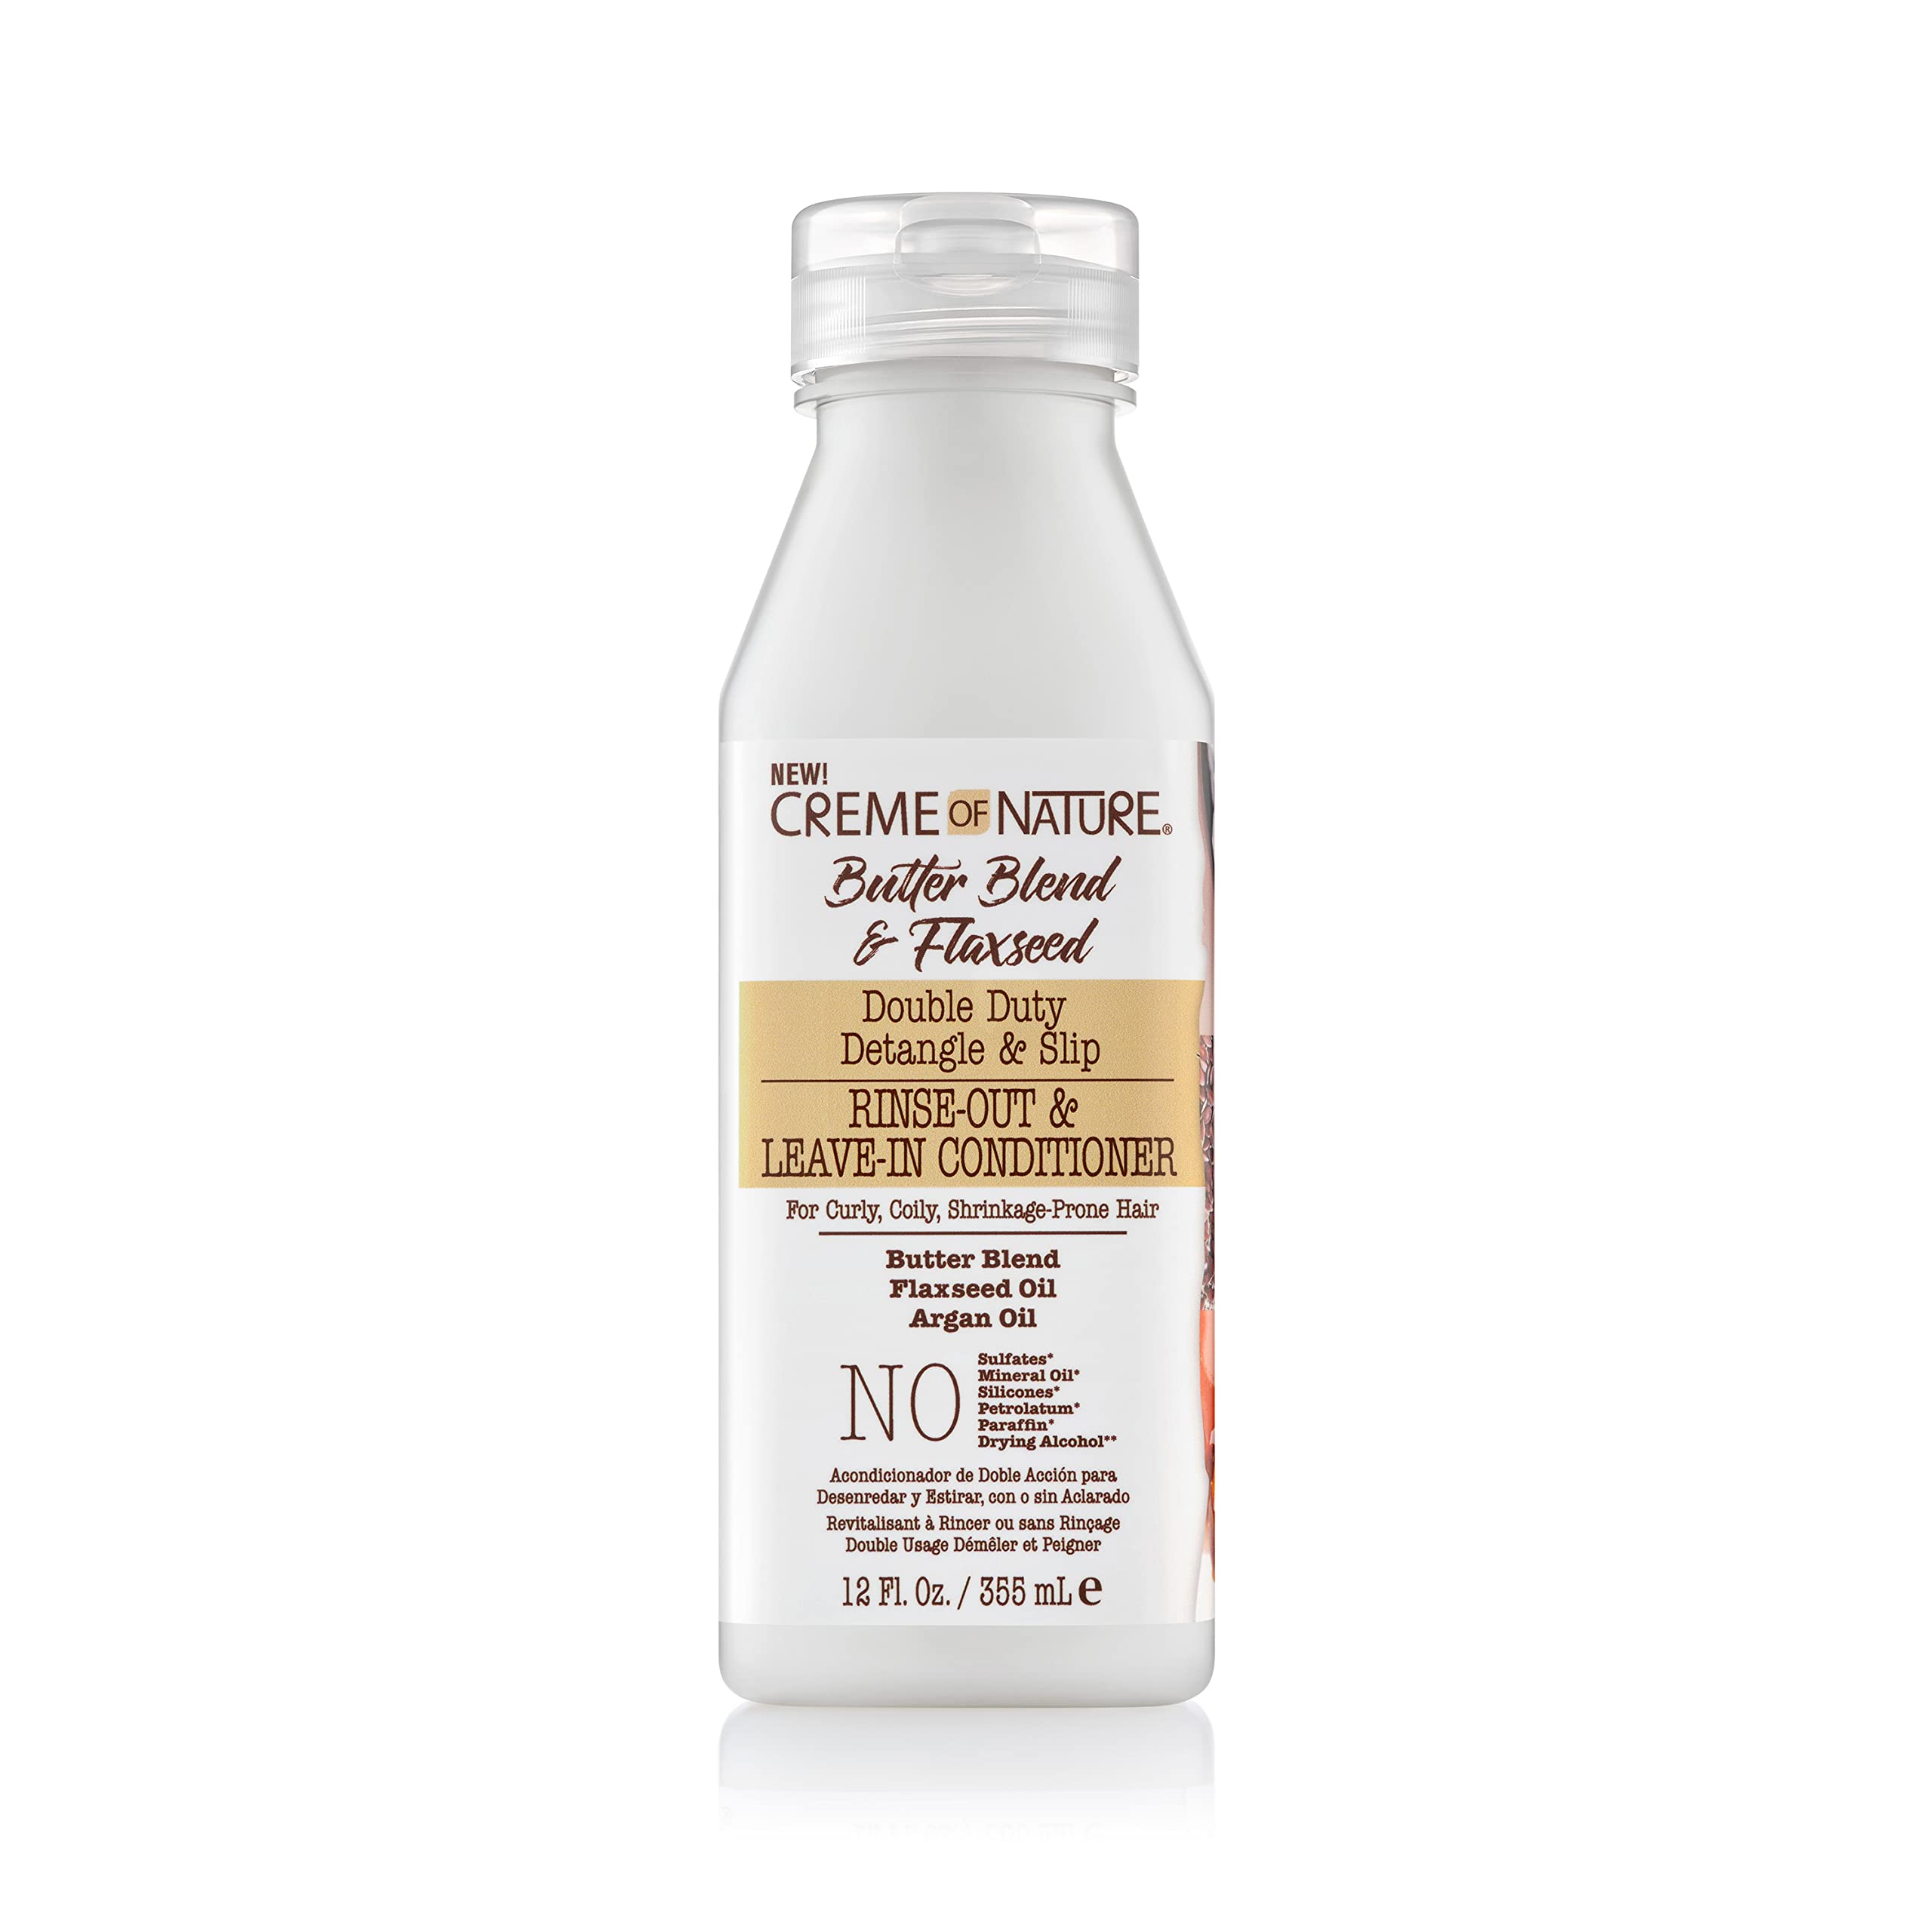 Leave In Conditioner by Creme of Nature, Butter Blend, Argan Oil, Flaxseed Oil, Rinse-Out, Leave-In, 12 Oz